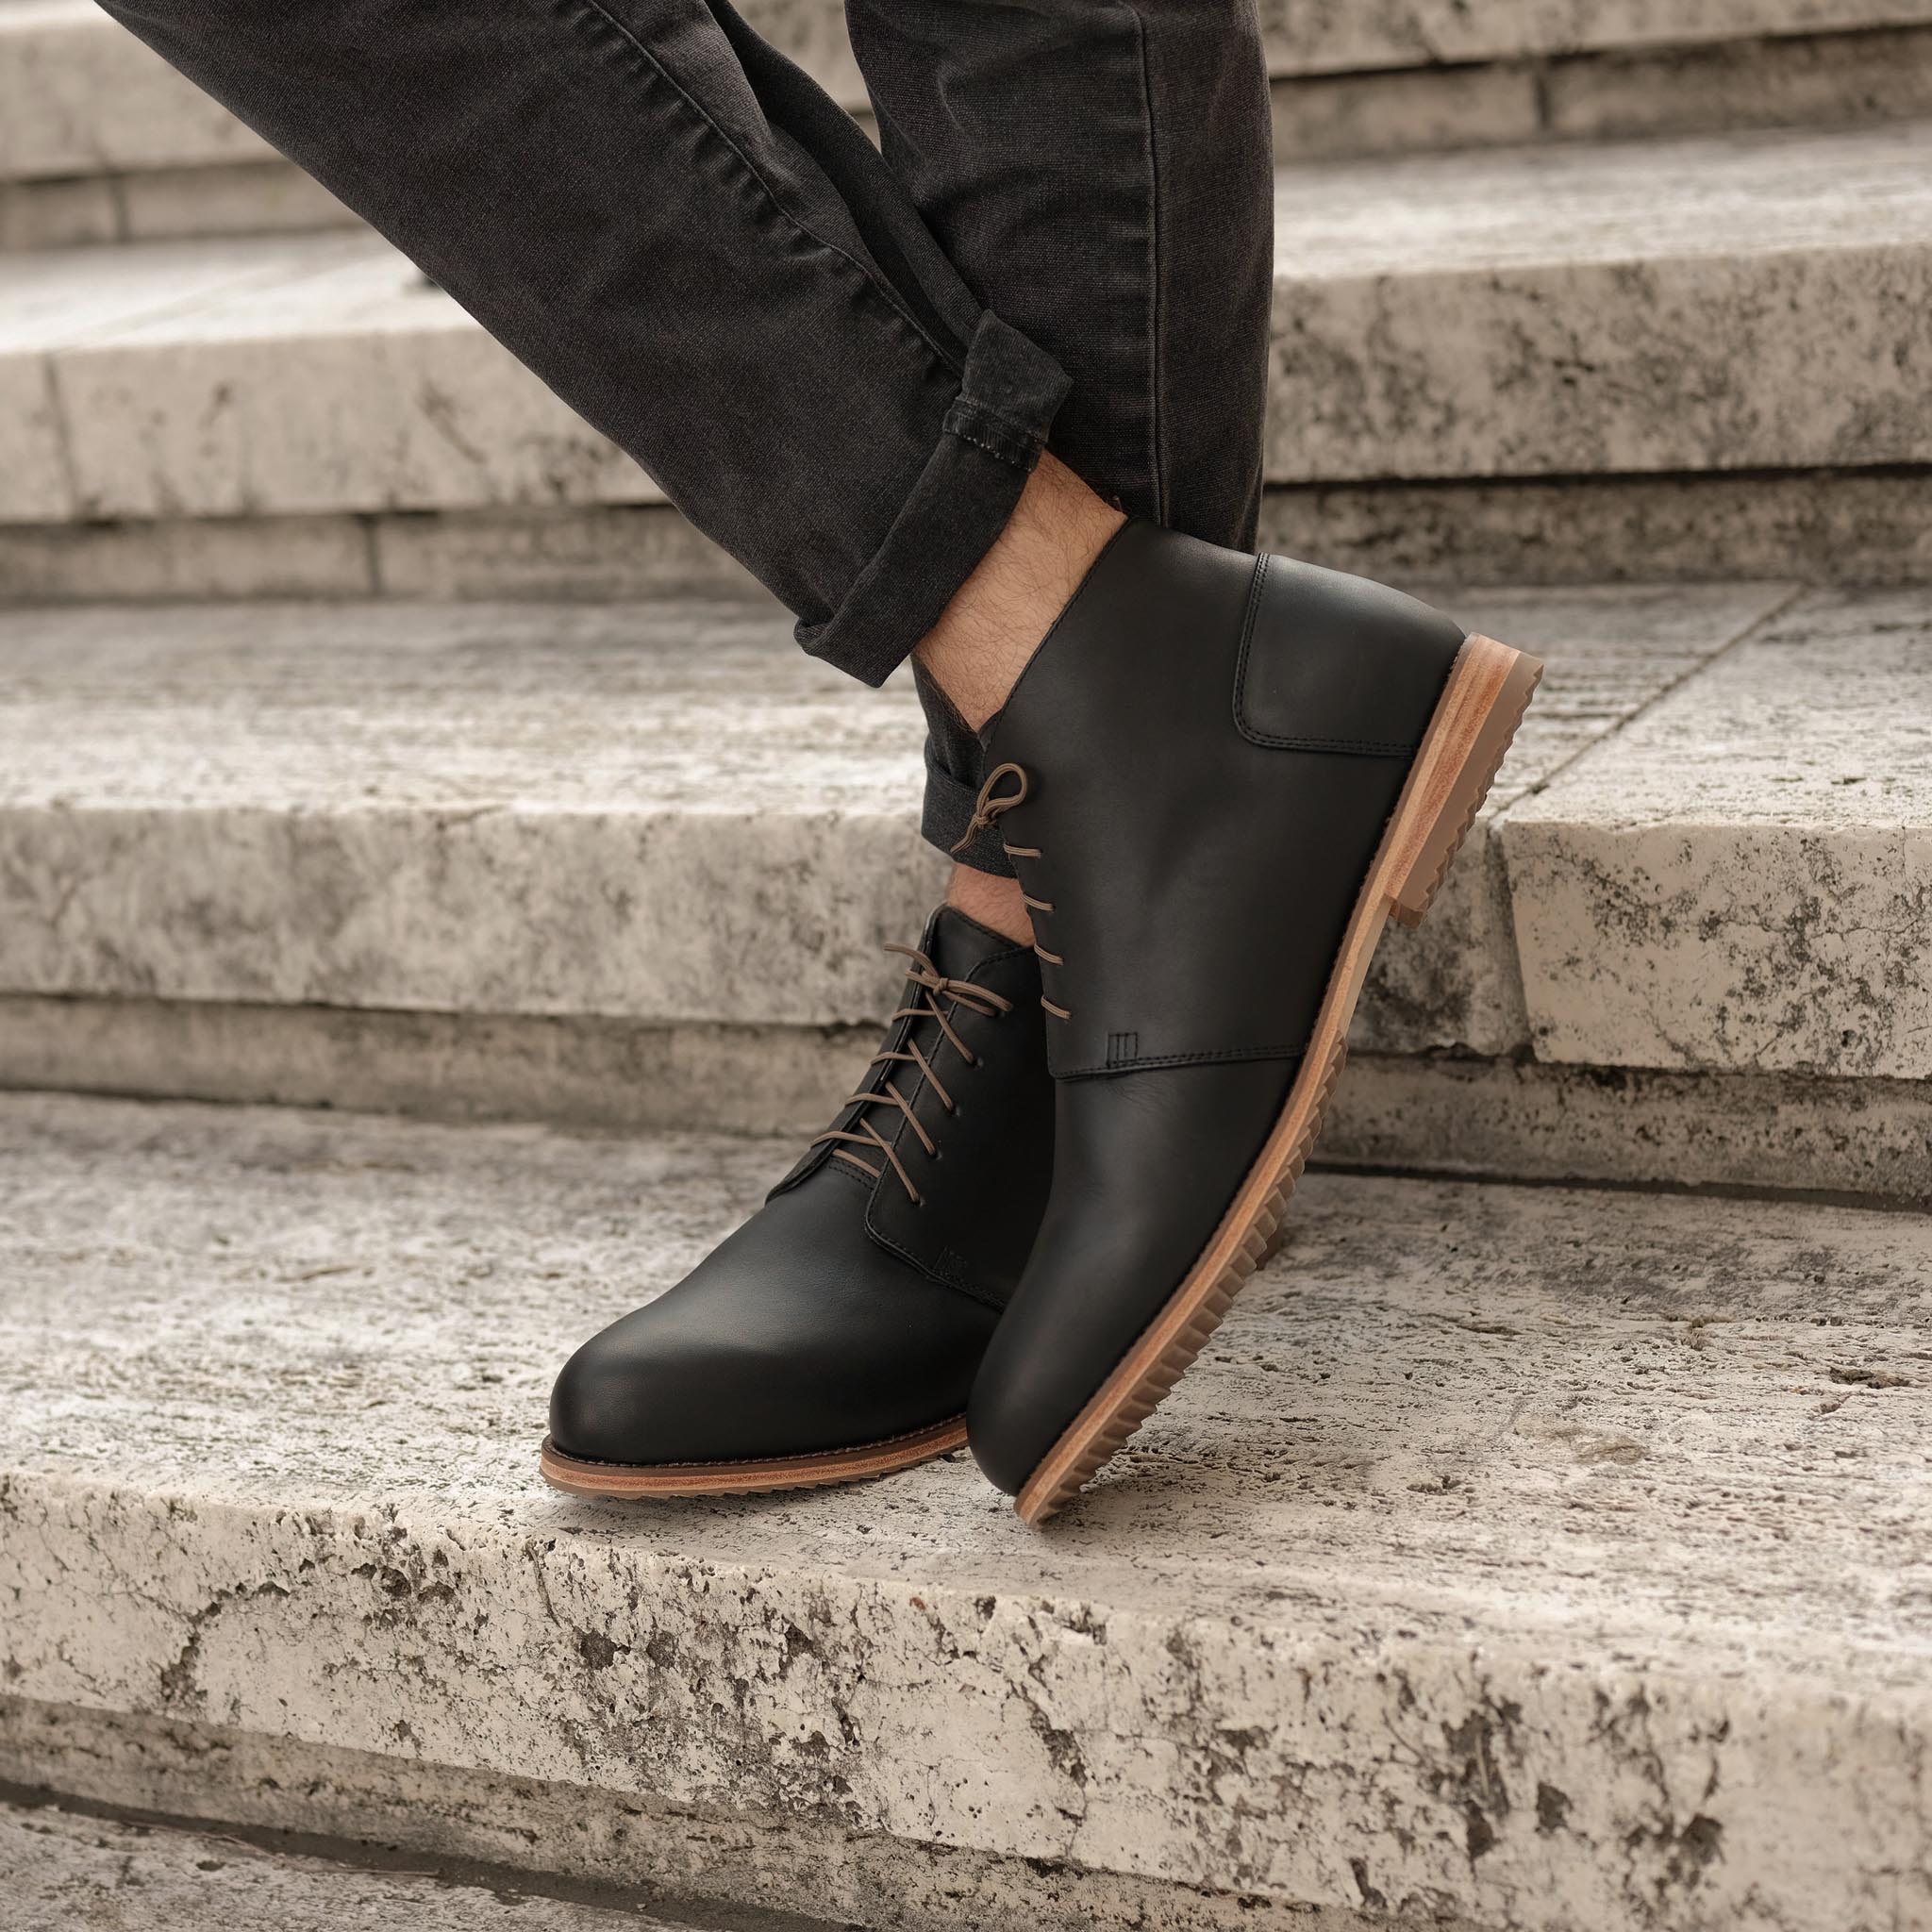 Image 2 of the Everyday Chukka Boot Black on model